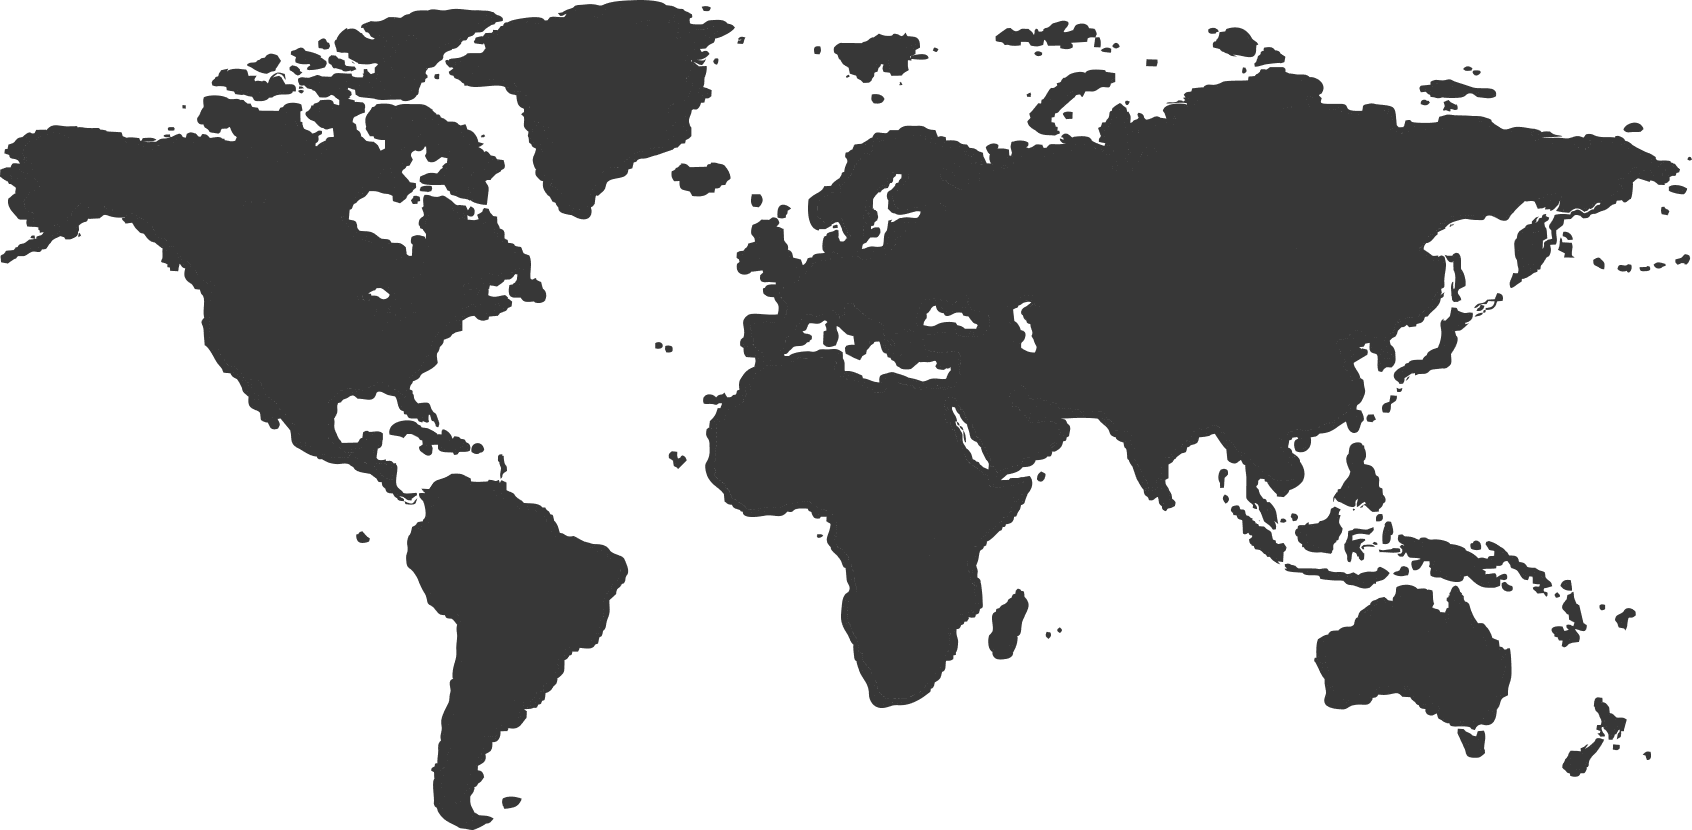 World map graphic with location pins